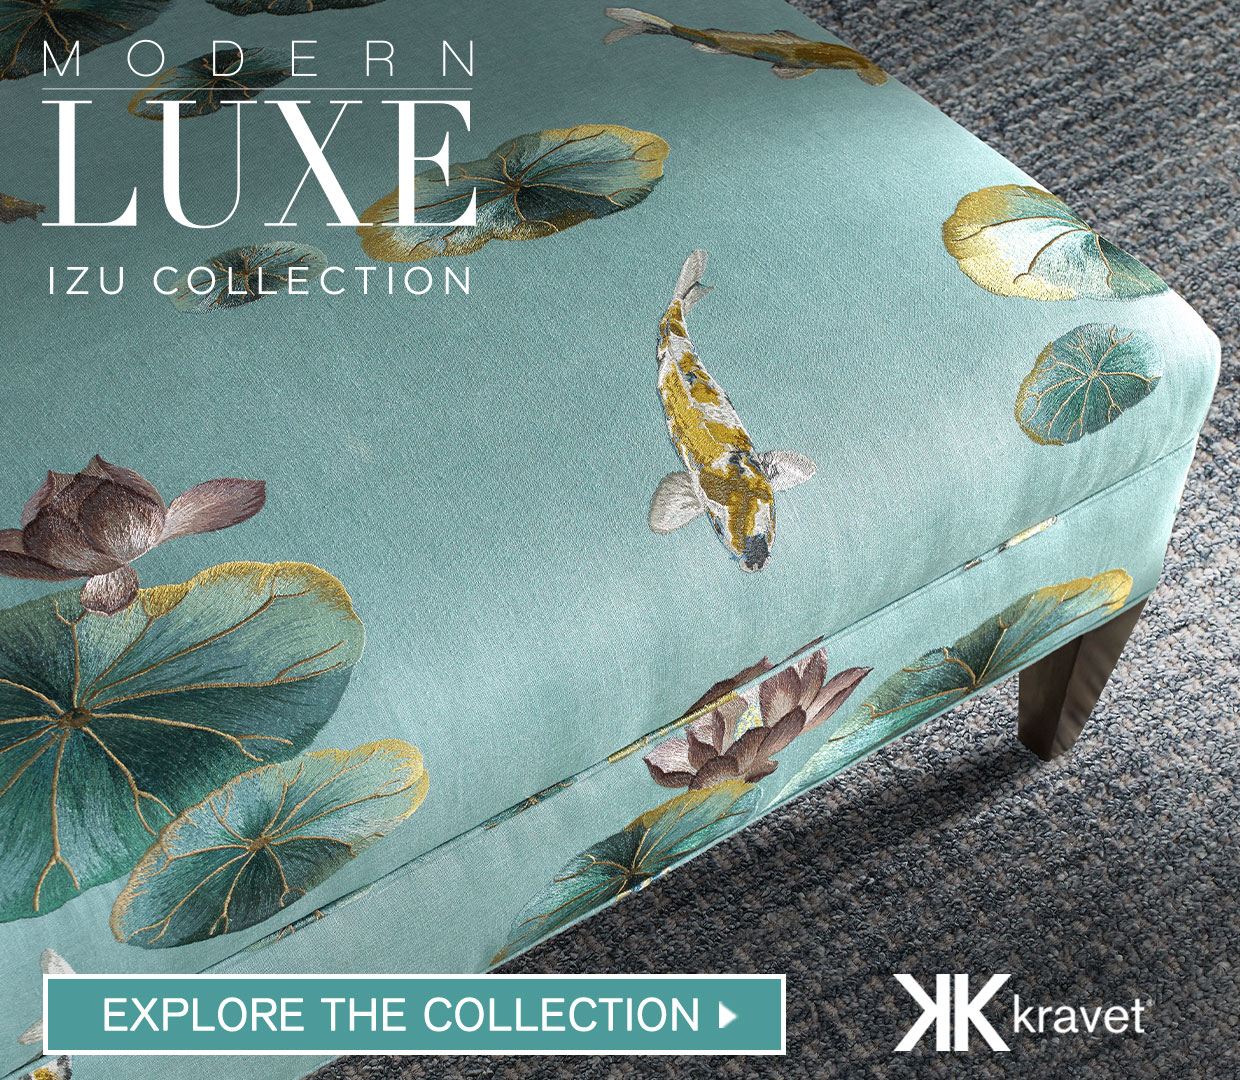 Explore the Modern Luxe Izu Collection from Kravet Couture. Check it out!